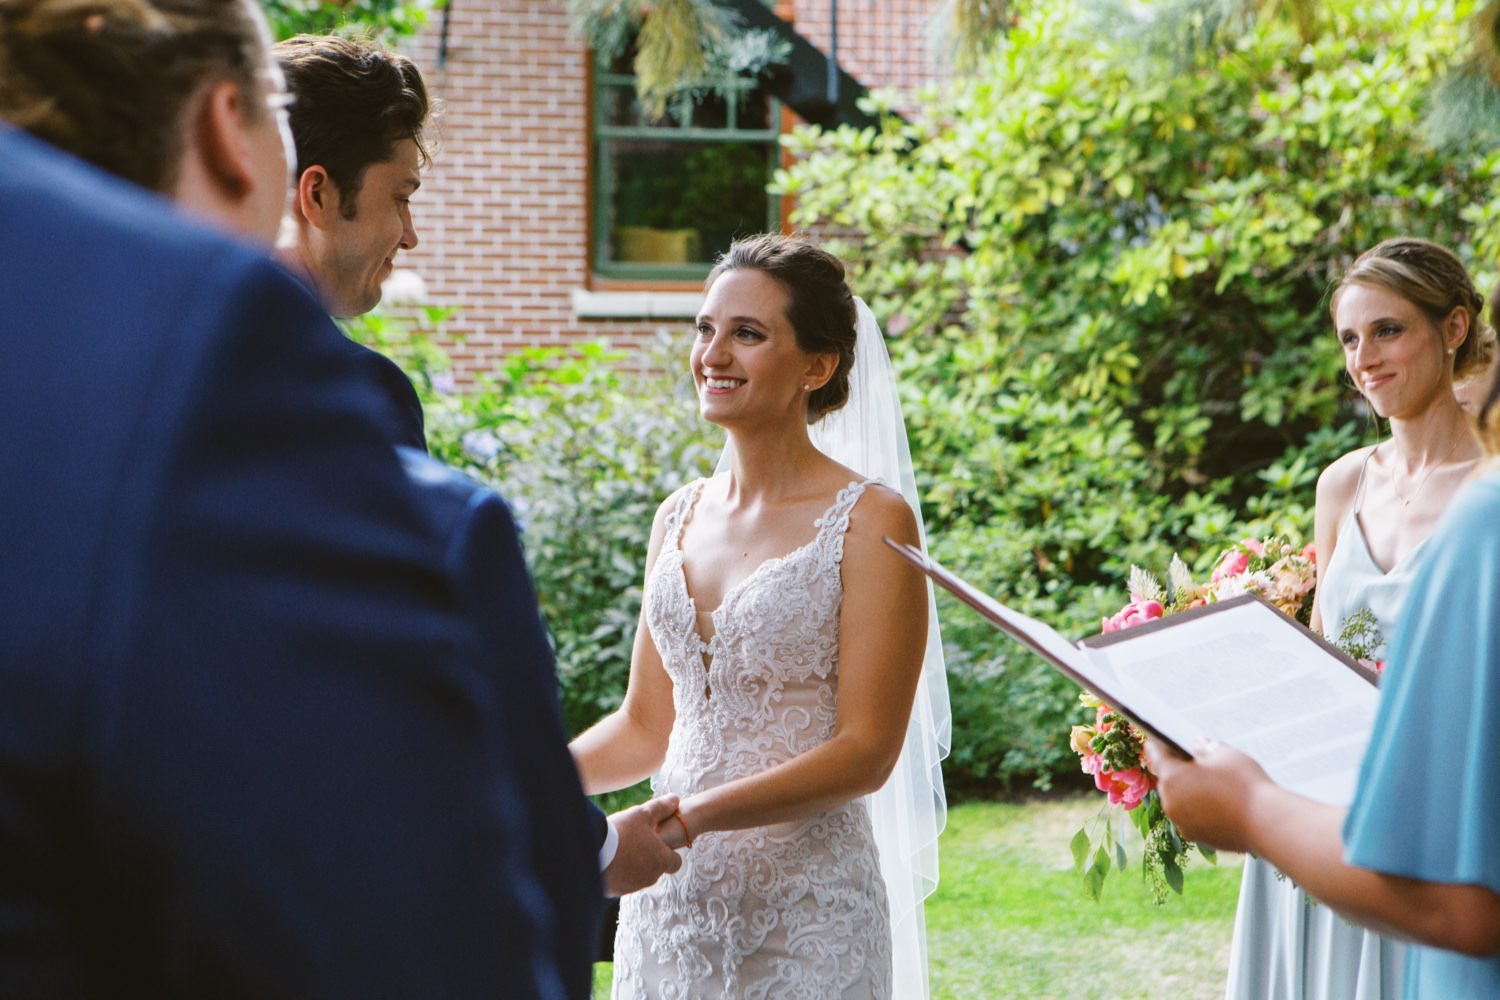  bride in white dress smiles at groom in blue suit 